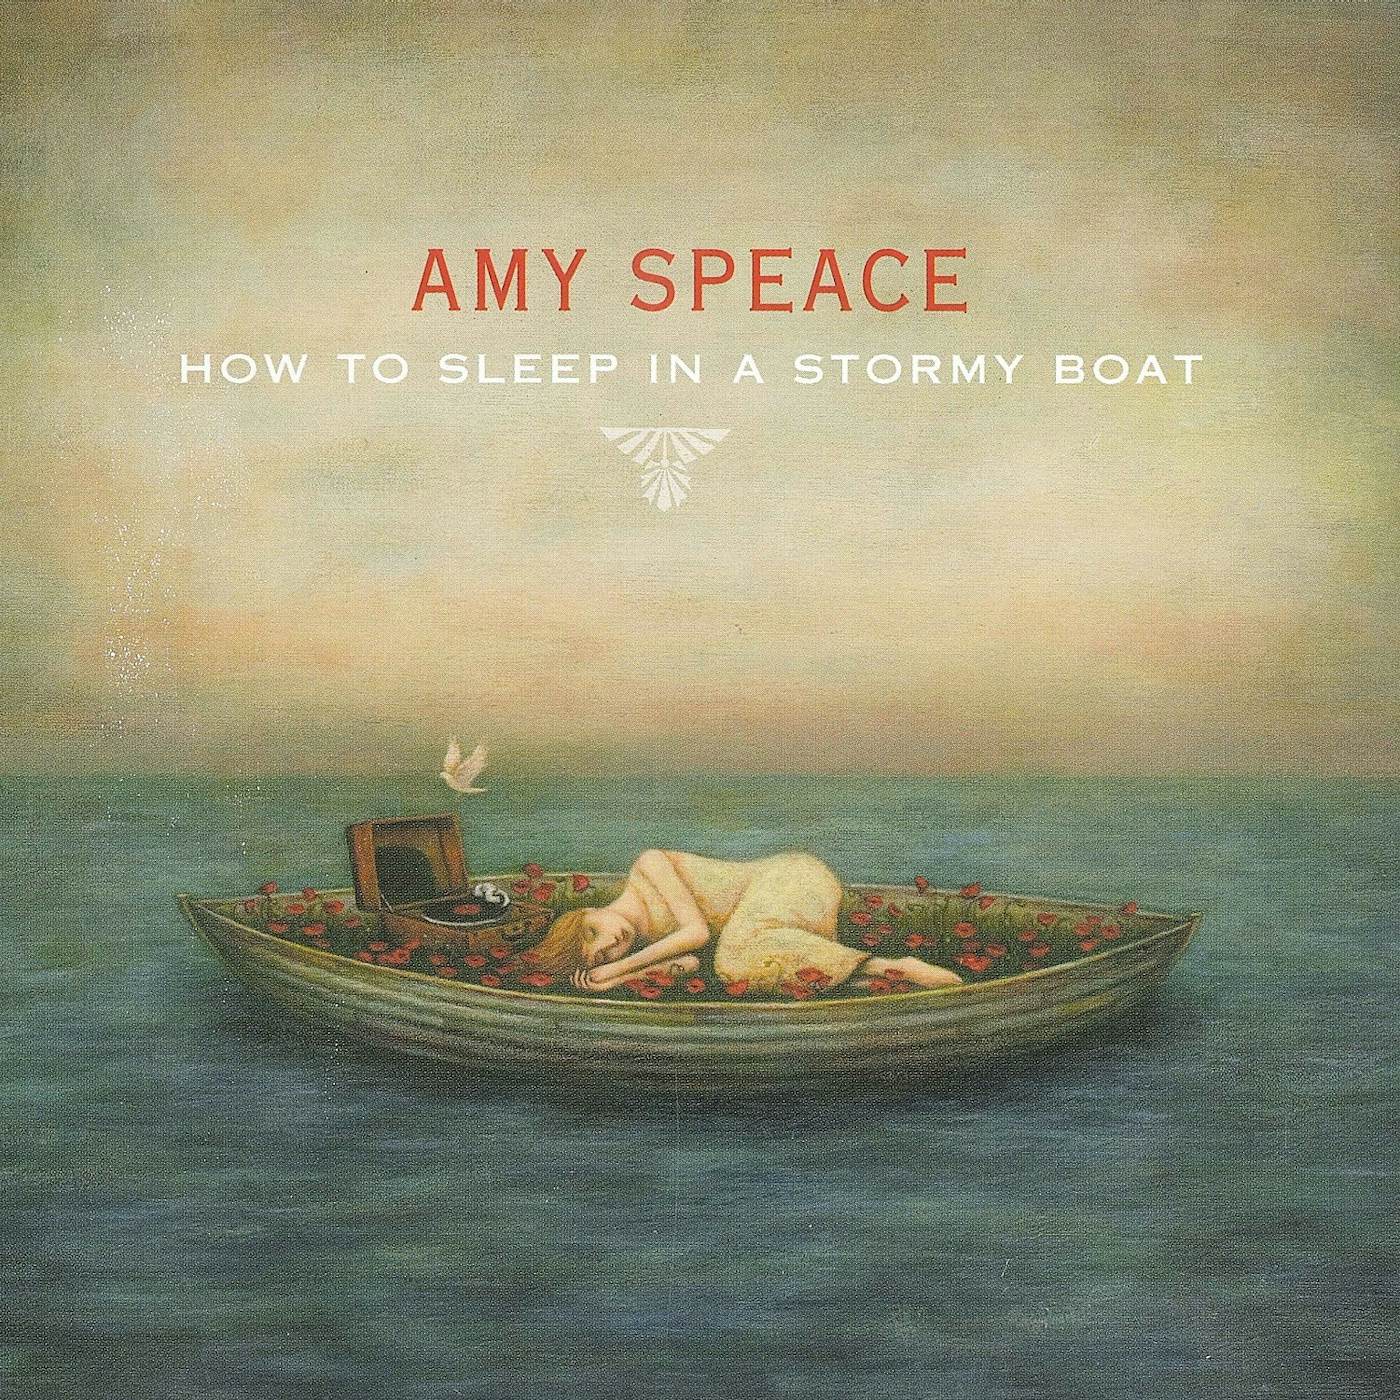 Amy Speace HOW TO SLEEP IN A STORMY BOAT CD